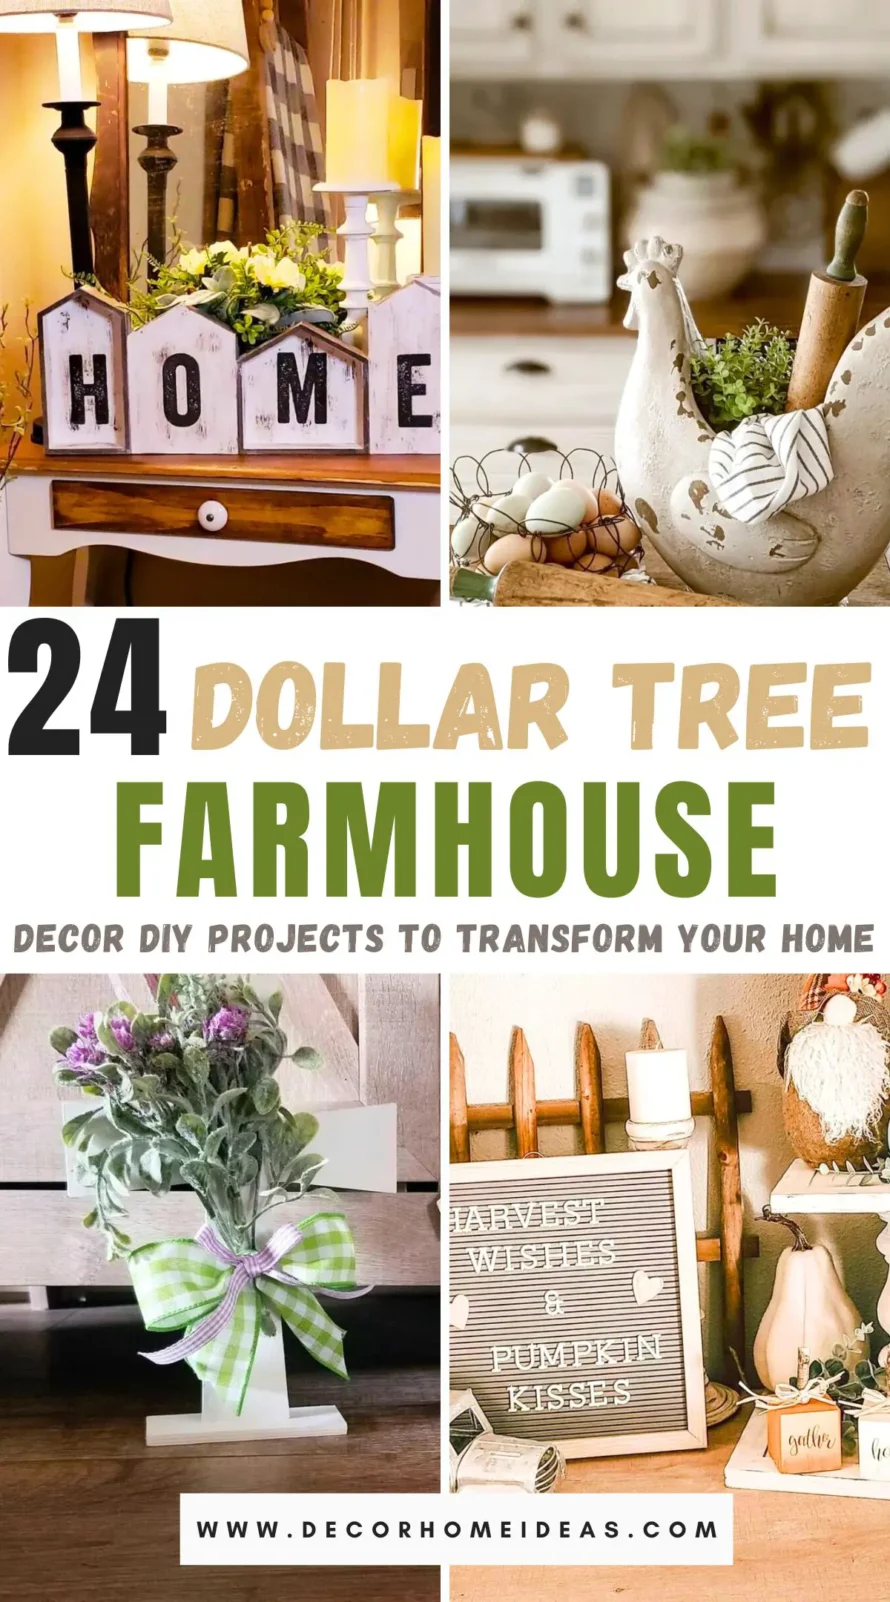 Discover 24 ingenious Dollar Tree farmhouse decor DIY projects that will transform your home on a budget. From rustic wall art to charming table centerpieces, these simple and affordable crafts add a cozy, farmhouse touch to any room. Get inspired to elevate your home decor with these creative ideas!